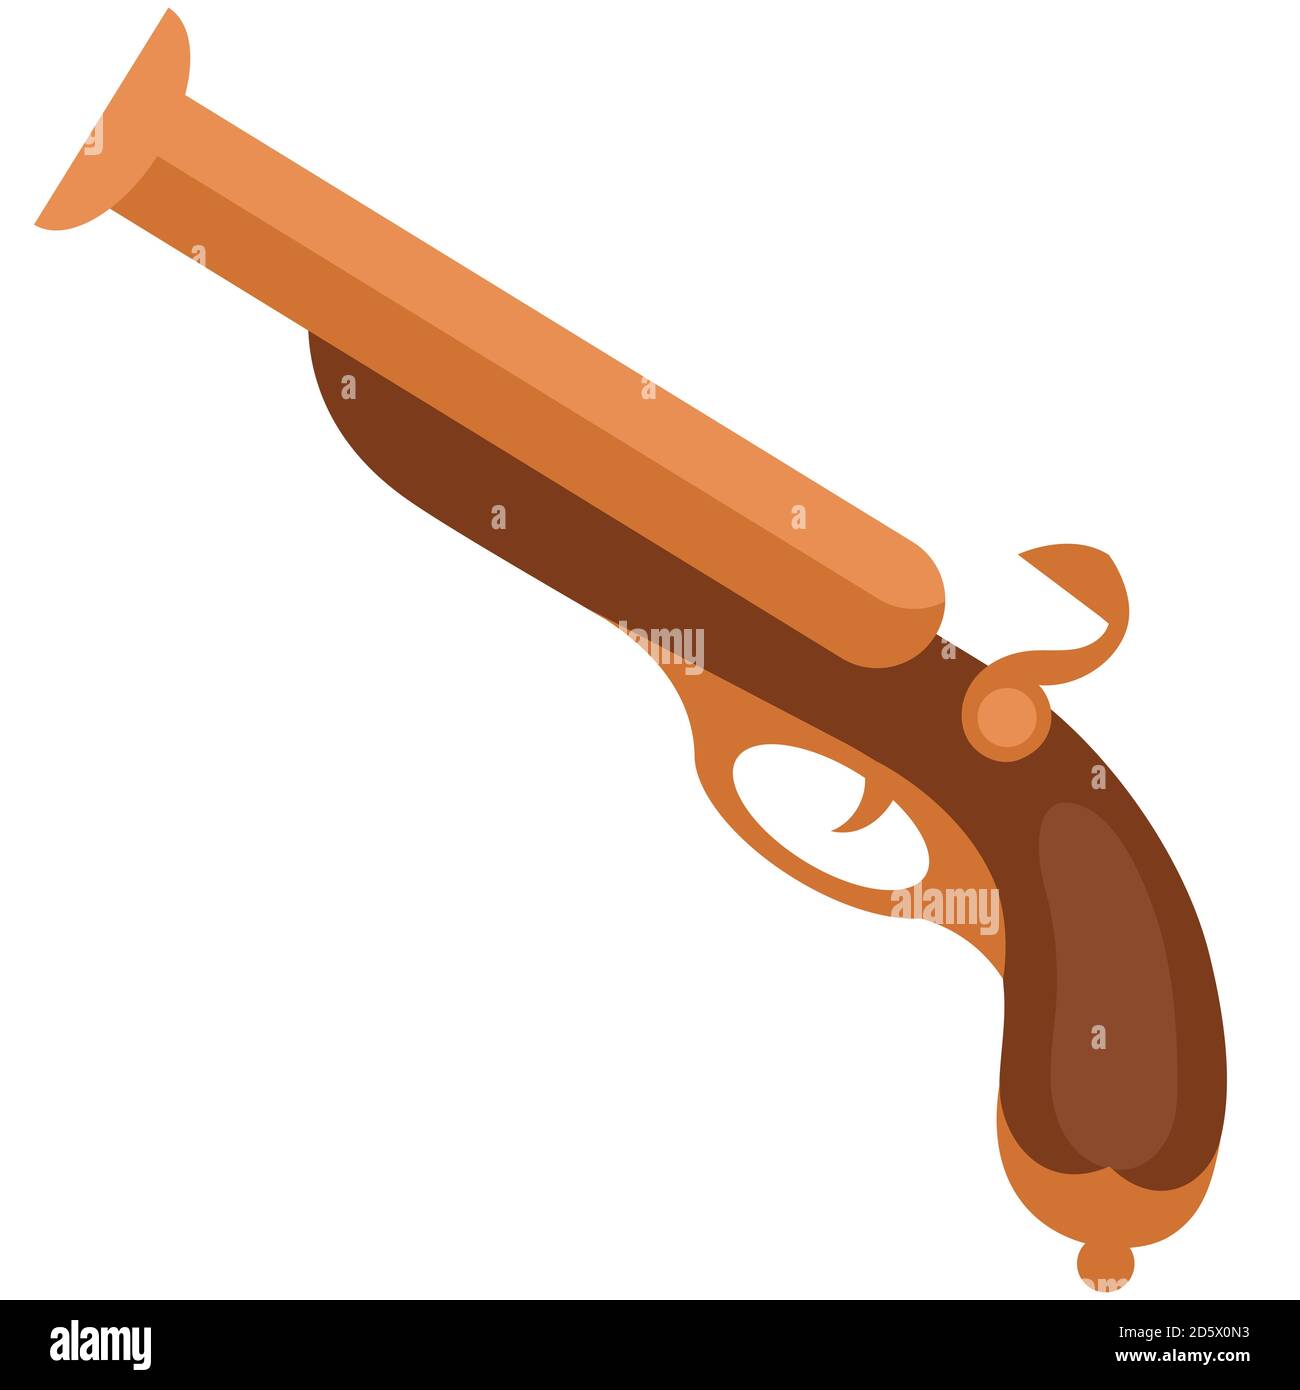 Pistol in flat style. Vintage pirate weapon. Stock Vector